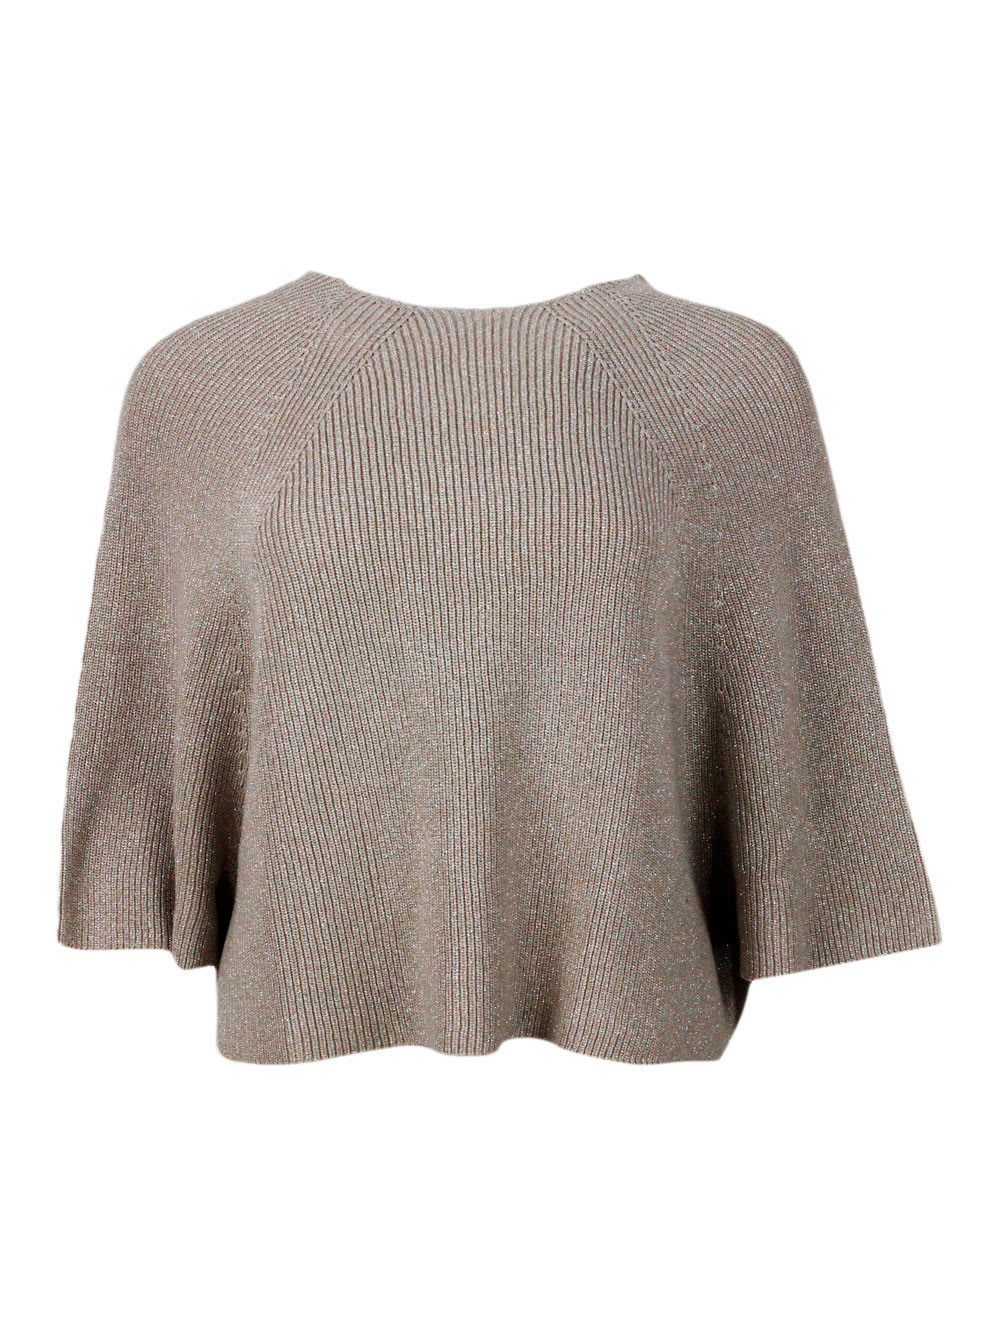 Boat Neck Sweater With Wide Sleeves With Half English Rib Knit In Cotton Embellished With Bright Lurex Threads